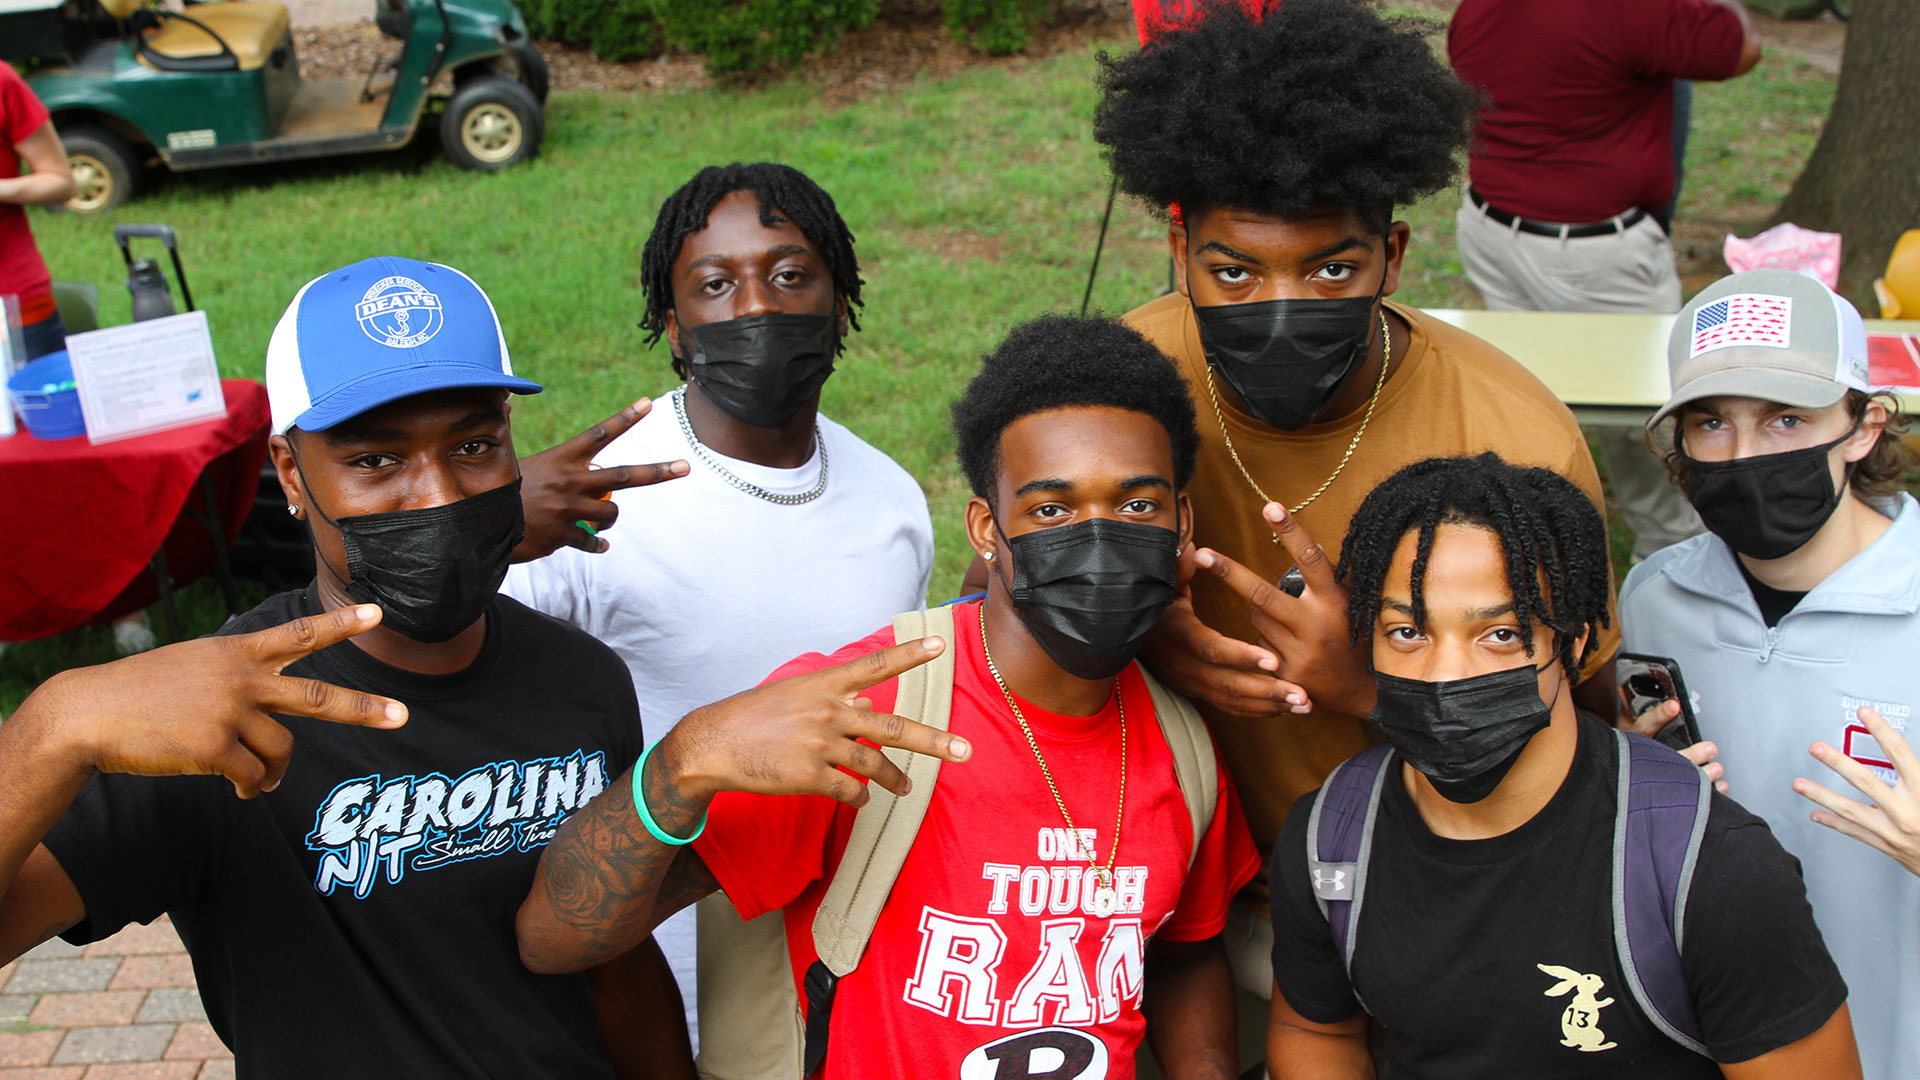 Five students wearing masks stand together to take a photo, showing peace signs with their fingers.